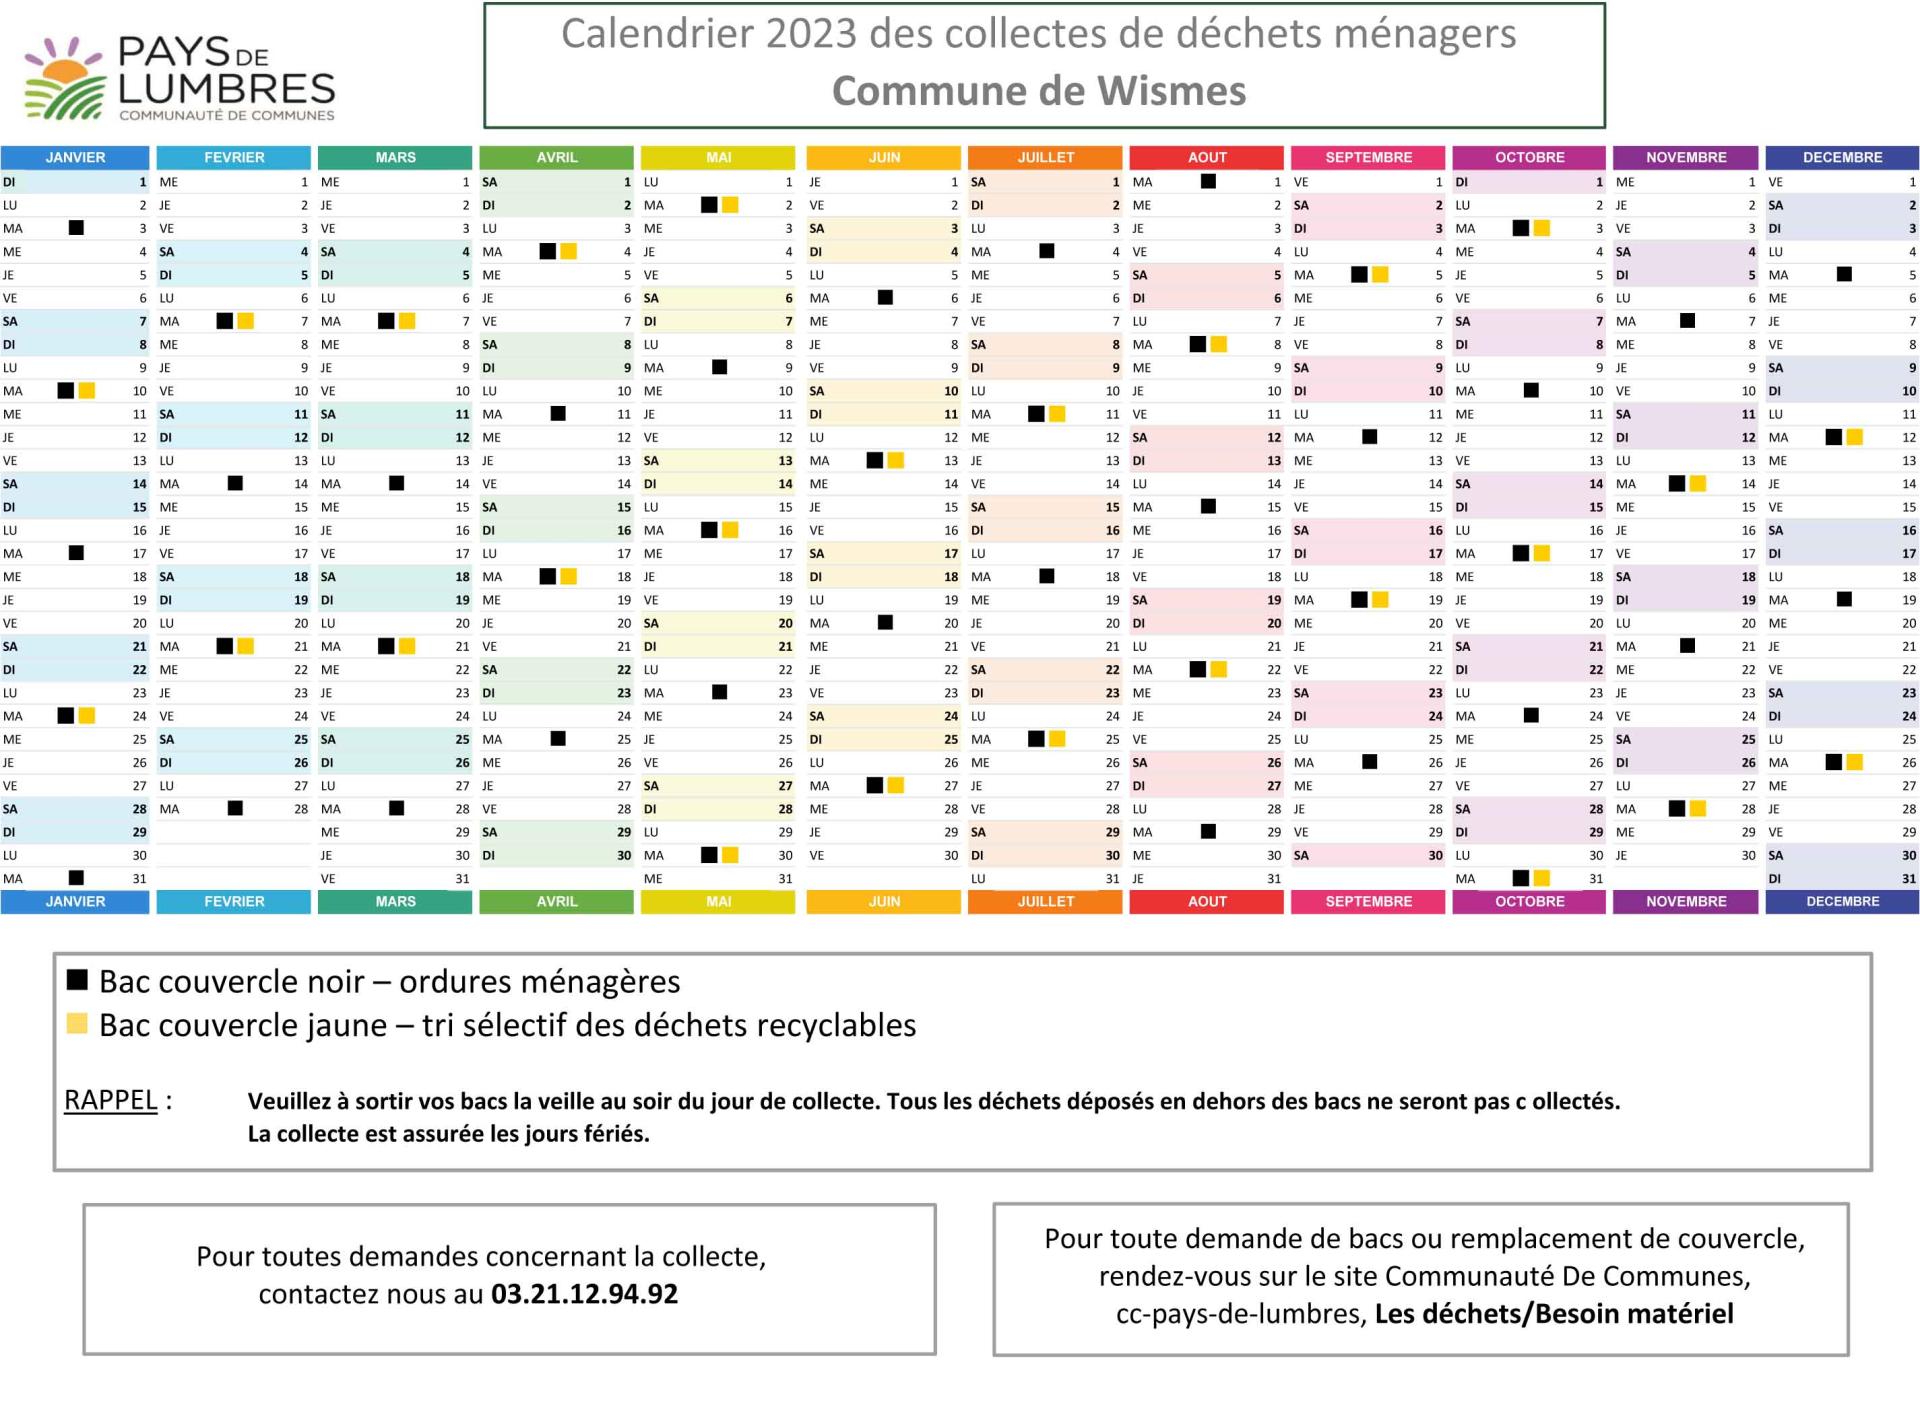 Calendrier 2023 wismes